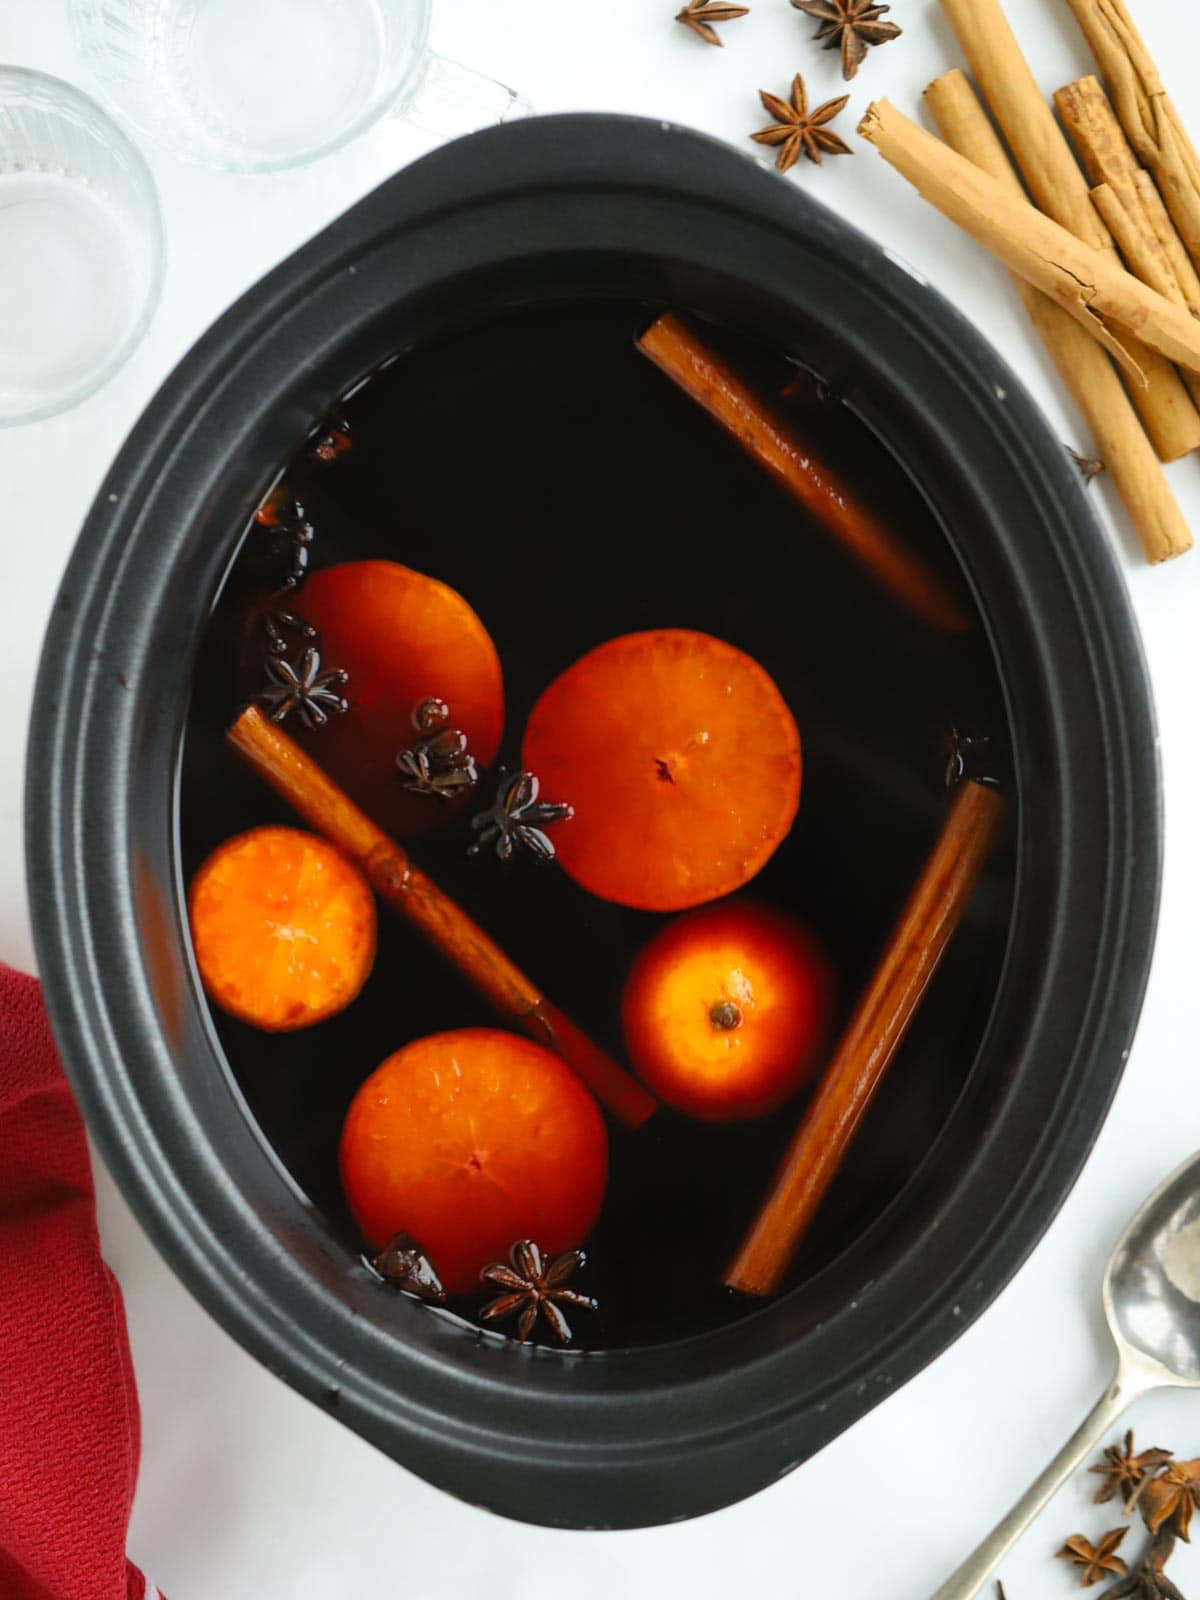 A slow cooker filled with ingredients to make mulled wine, including red wine, oranges and cinnamon sticks.